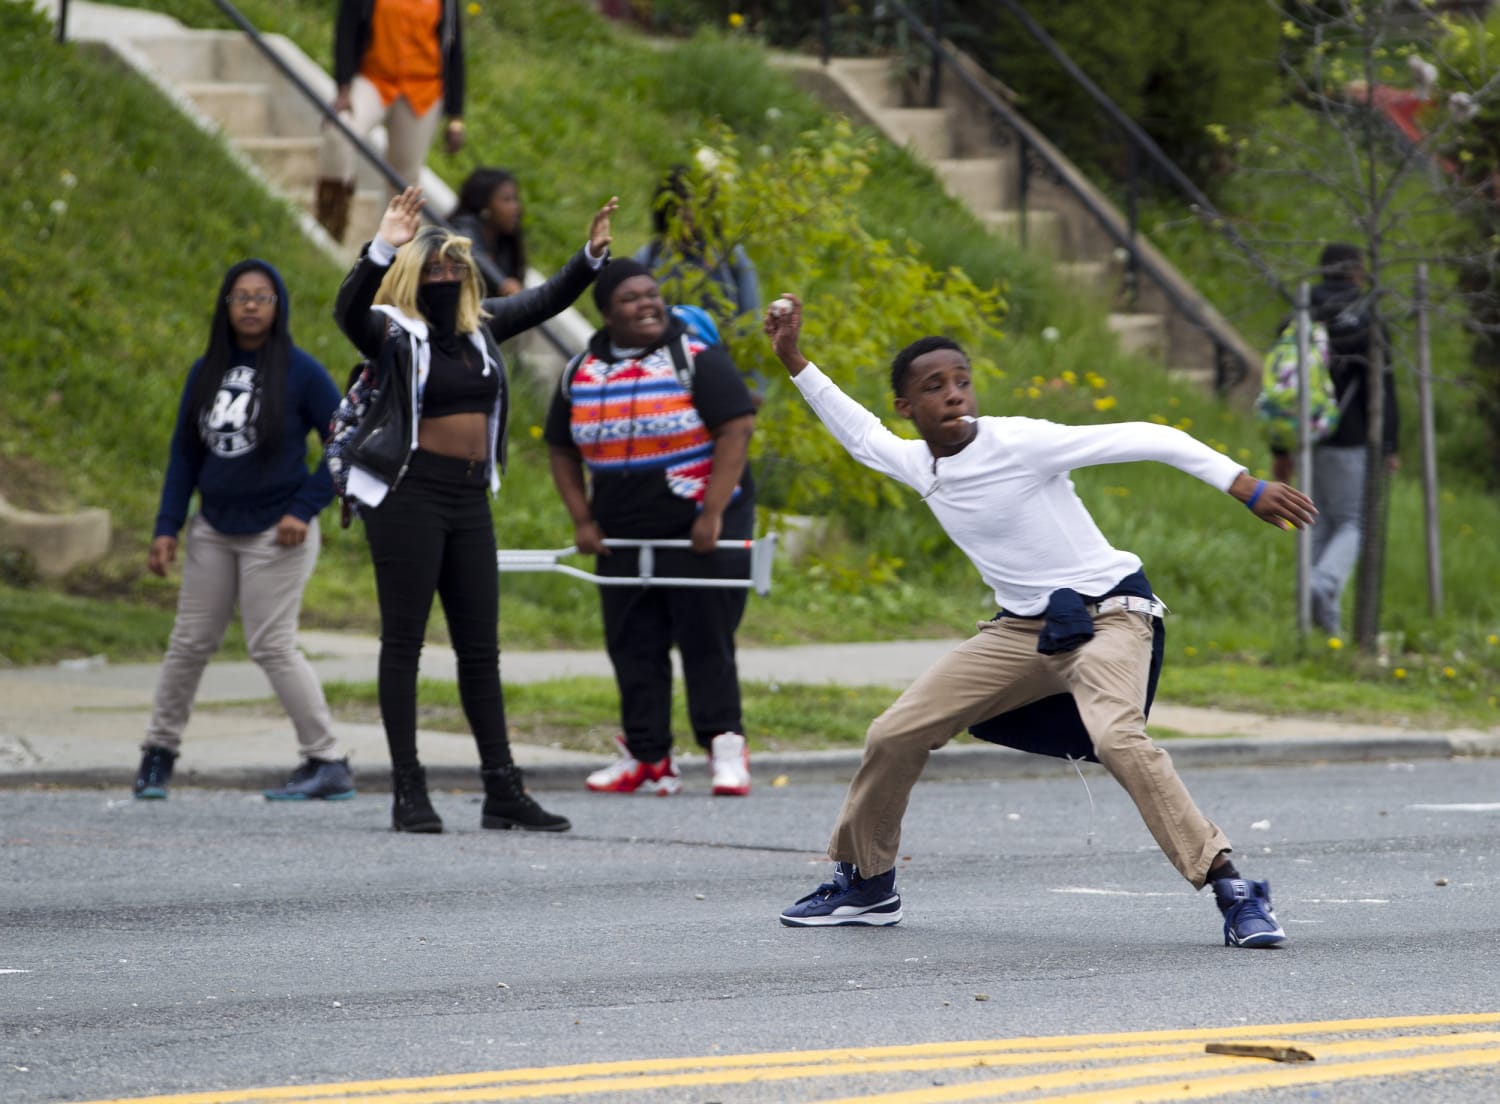 State of Emergency Declared as Baltimore Protests Turn Violent.